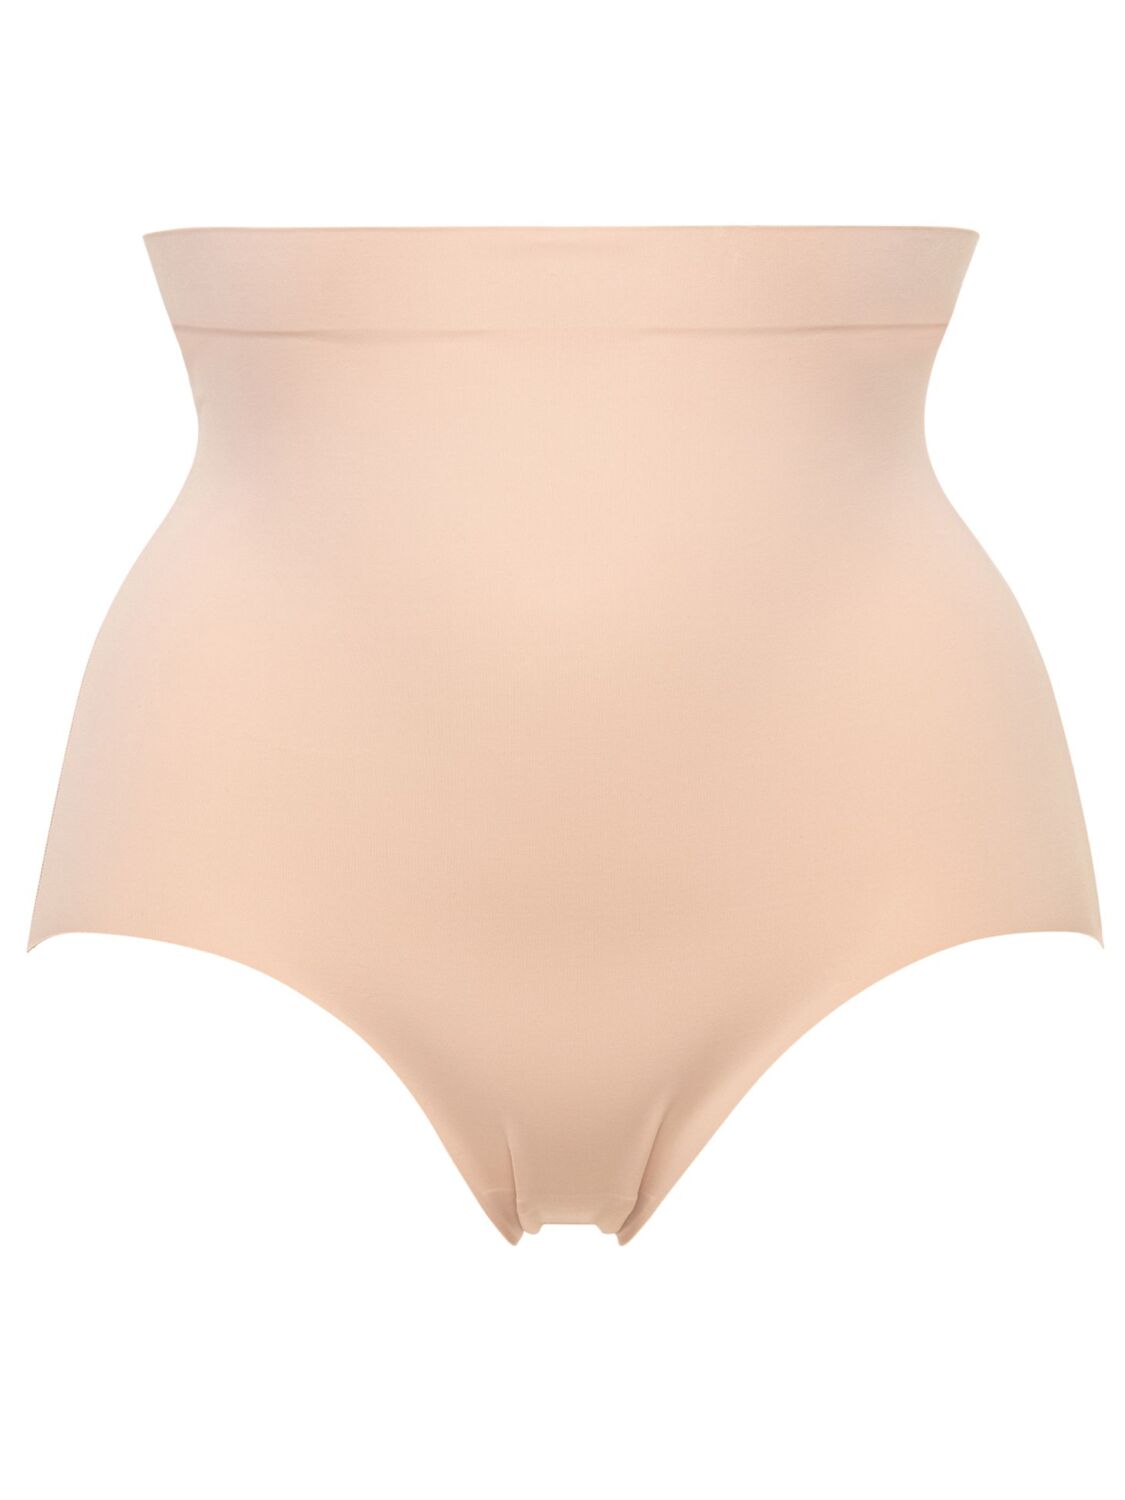 Sans Complexe Highwaist Slip PERFECT TOUCH Farbe Nude